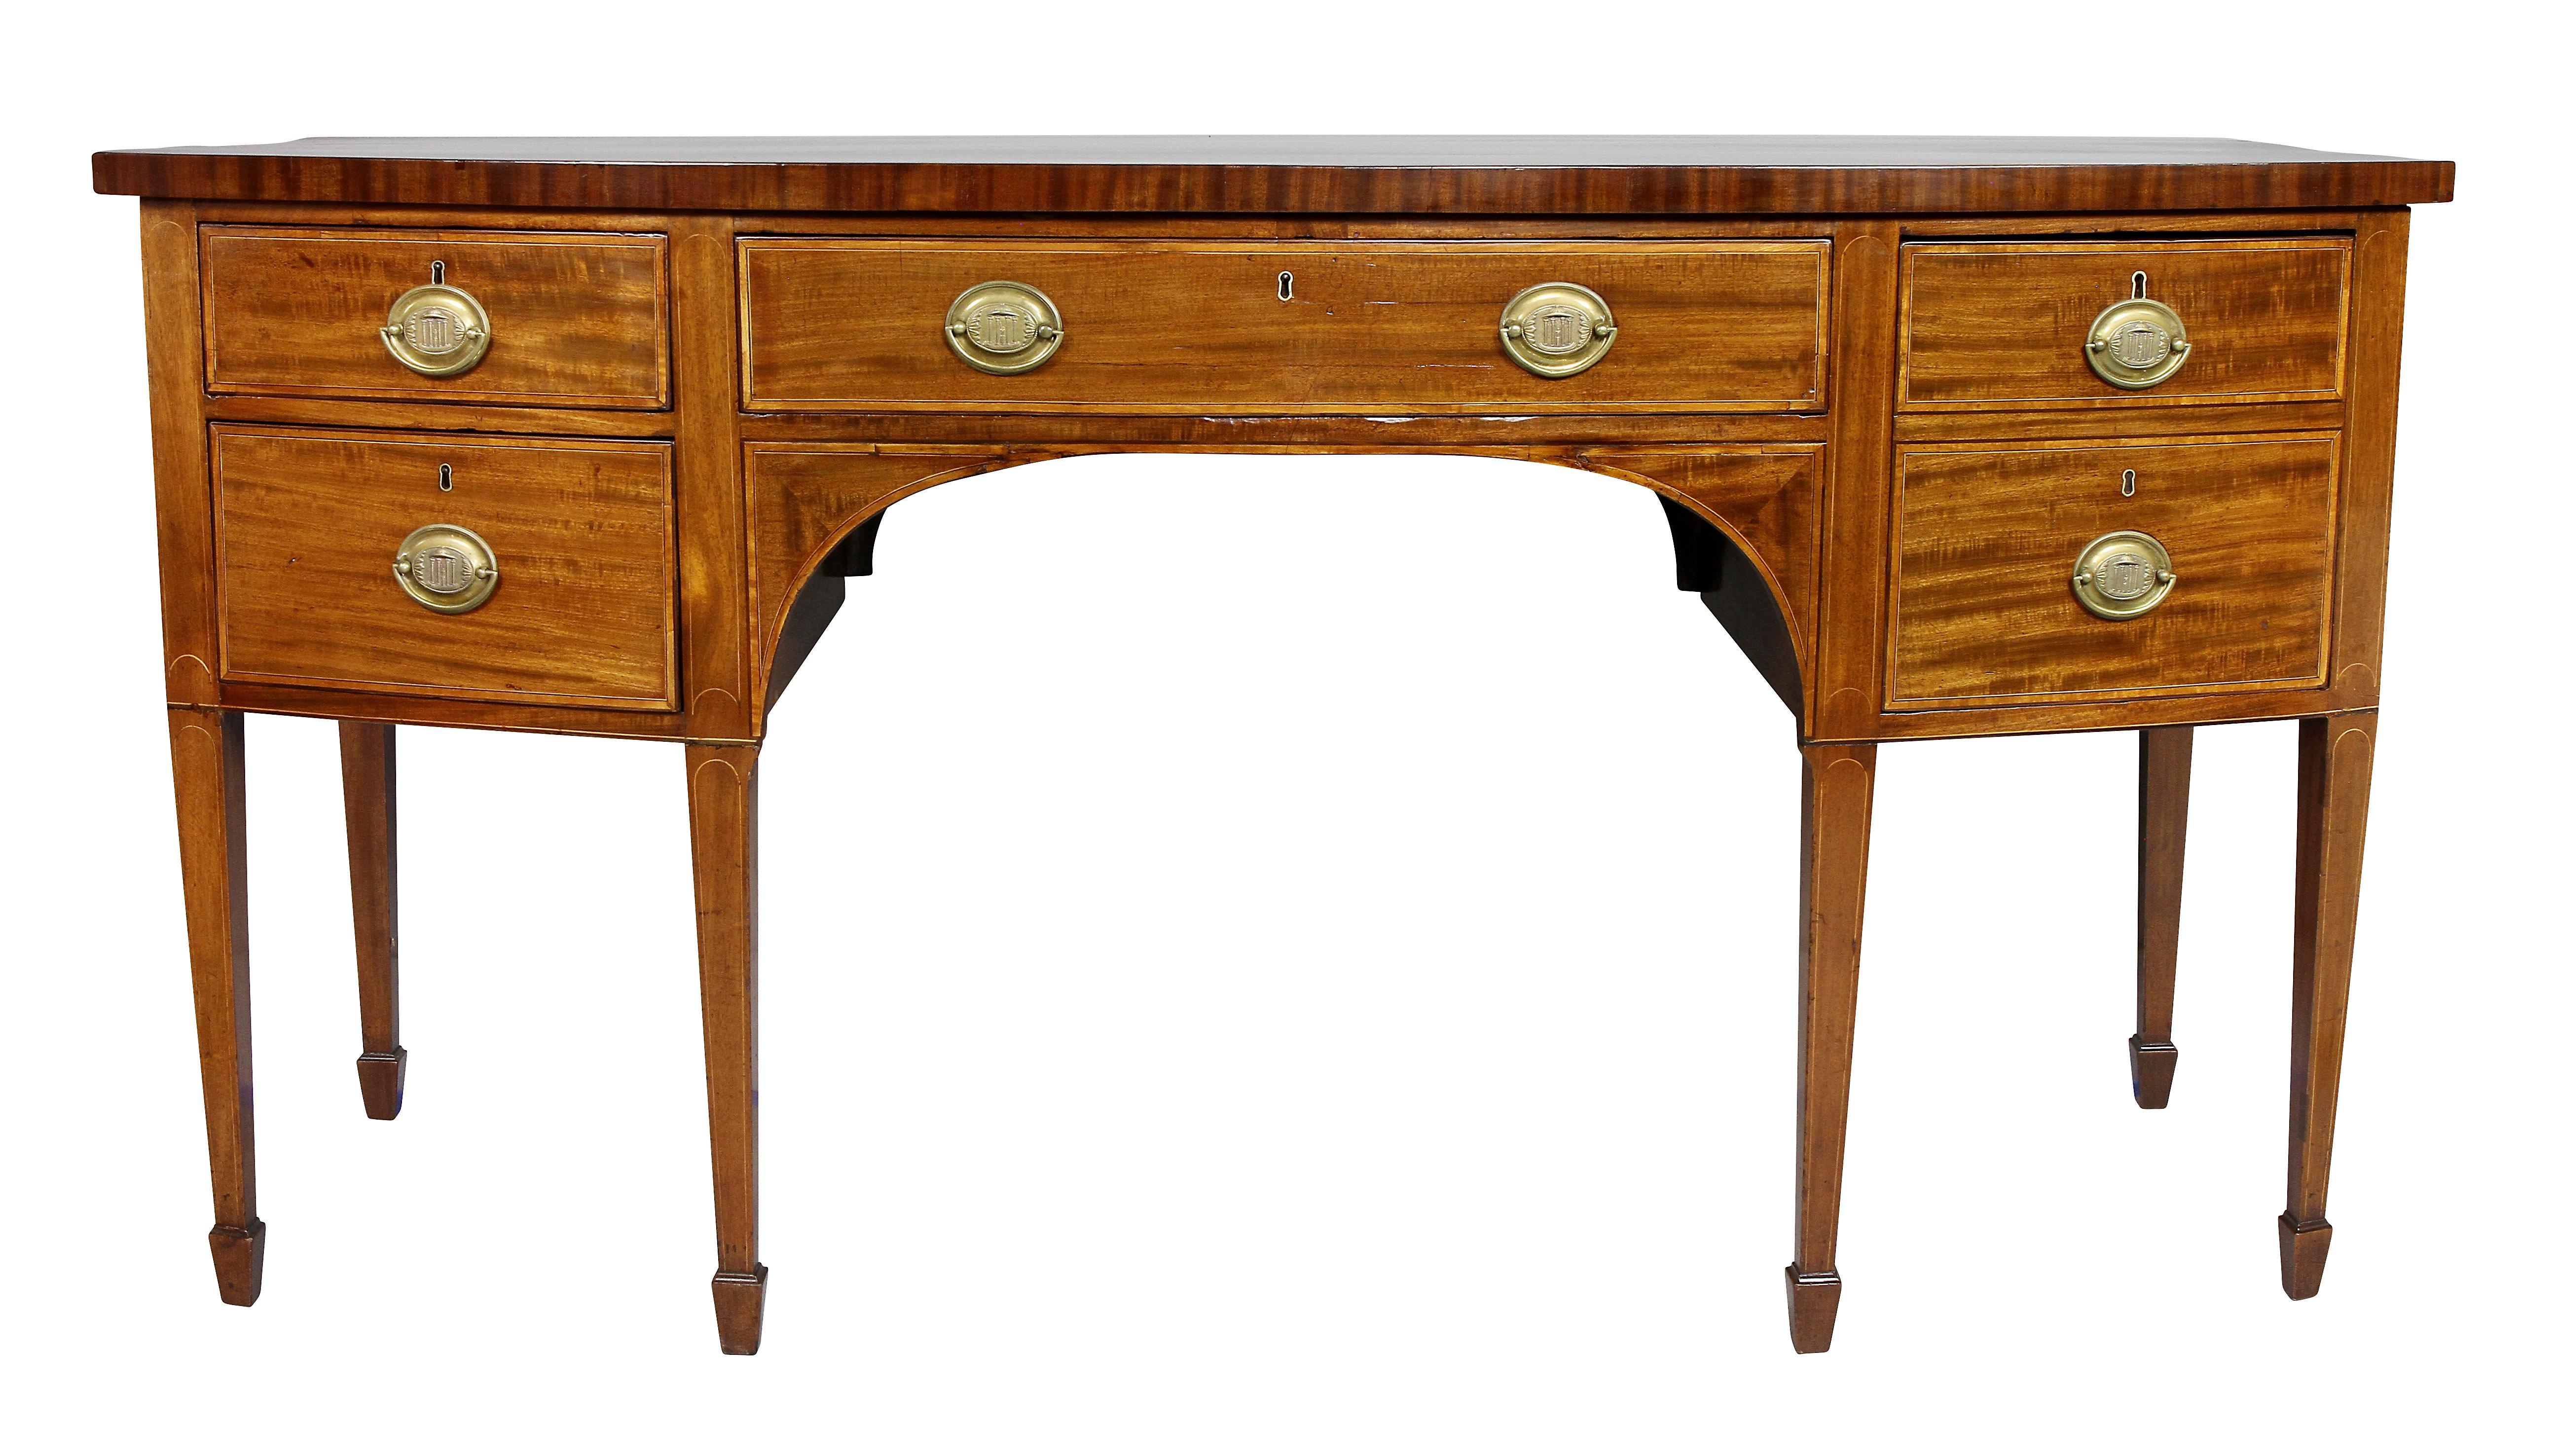 With a bowed rectangular top over a long central drawer flanked on the right by a double drawer and the left two drawers, all cross banded and with oval brass handles, raised on square tapered legs and spade feet.